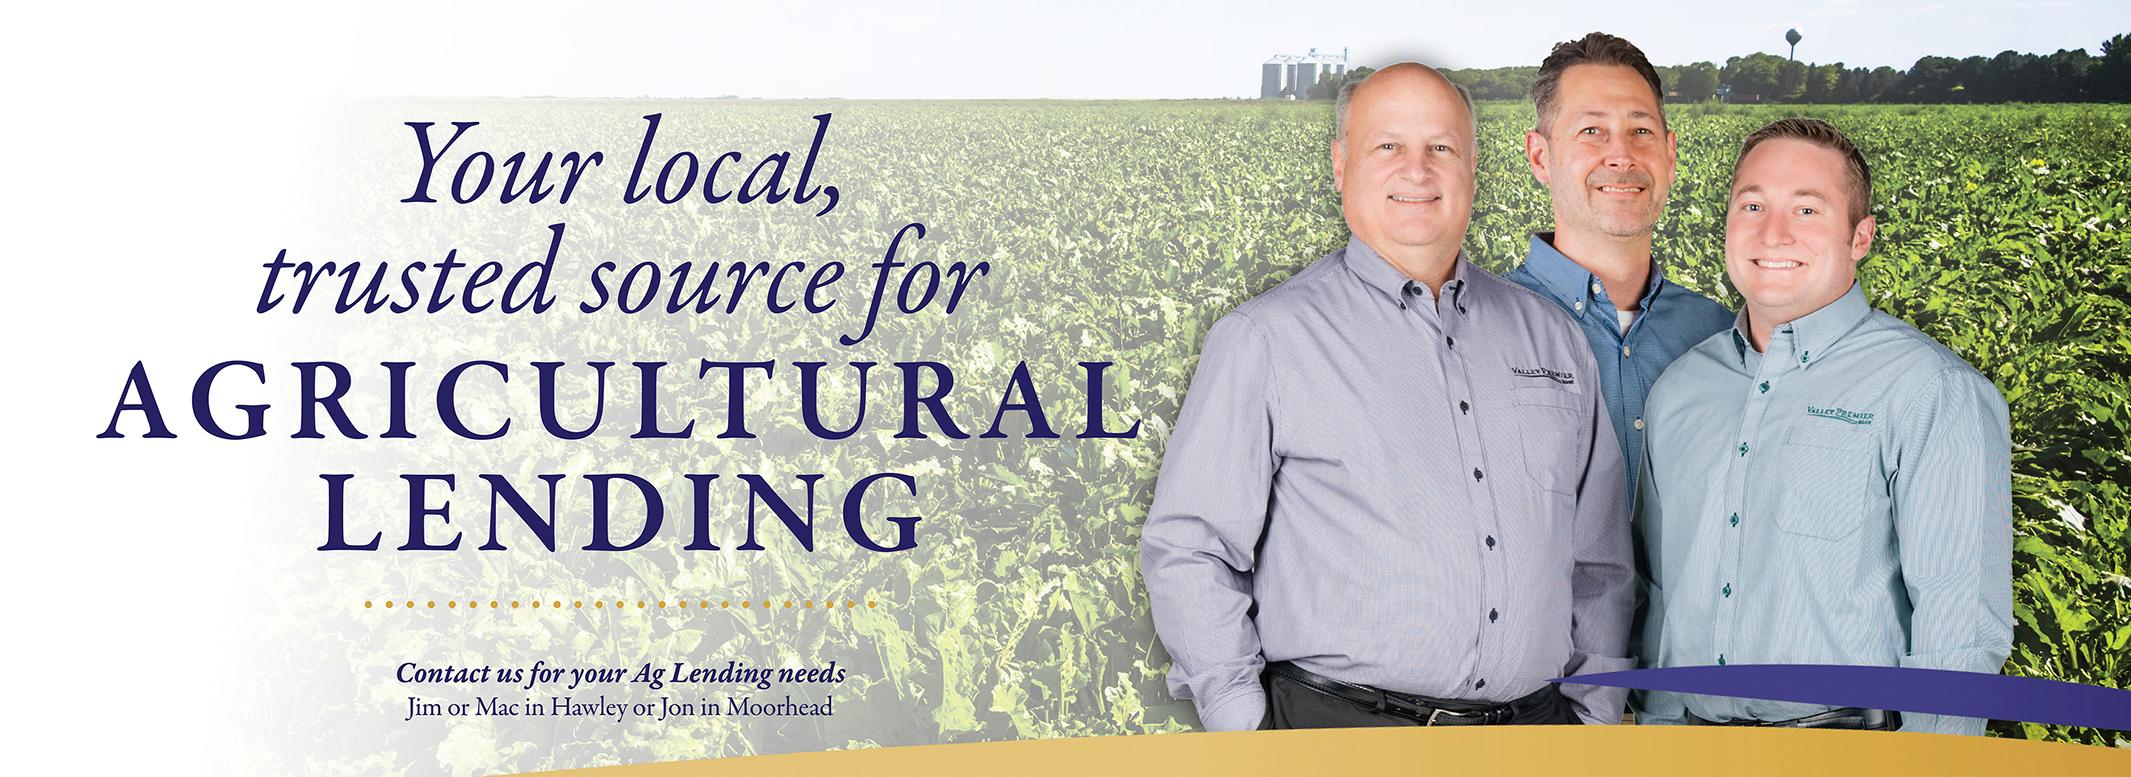 Your local, trusted source for Agricultural Lending.  Contact us for your Ag Lending needs.  Jim or Mac in Hawley or Jon in Moorhead wian image of a corn field.